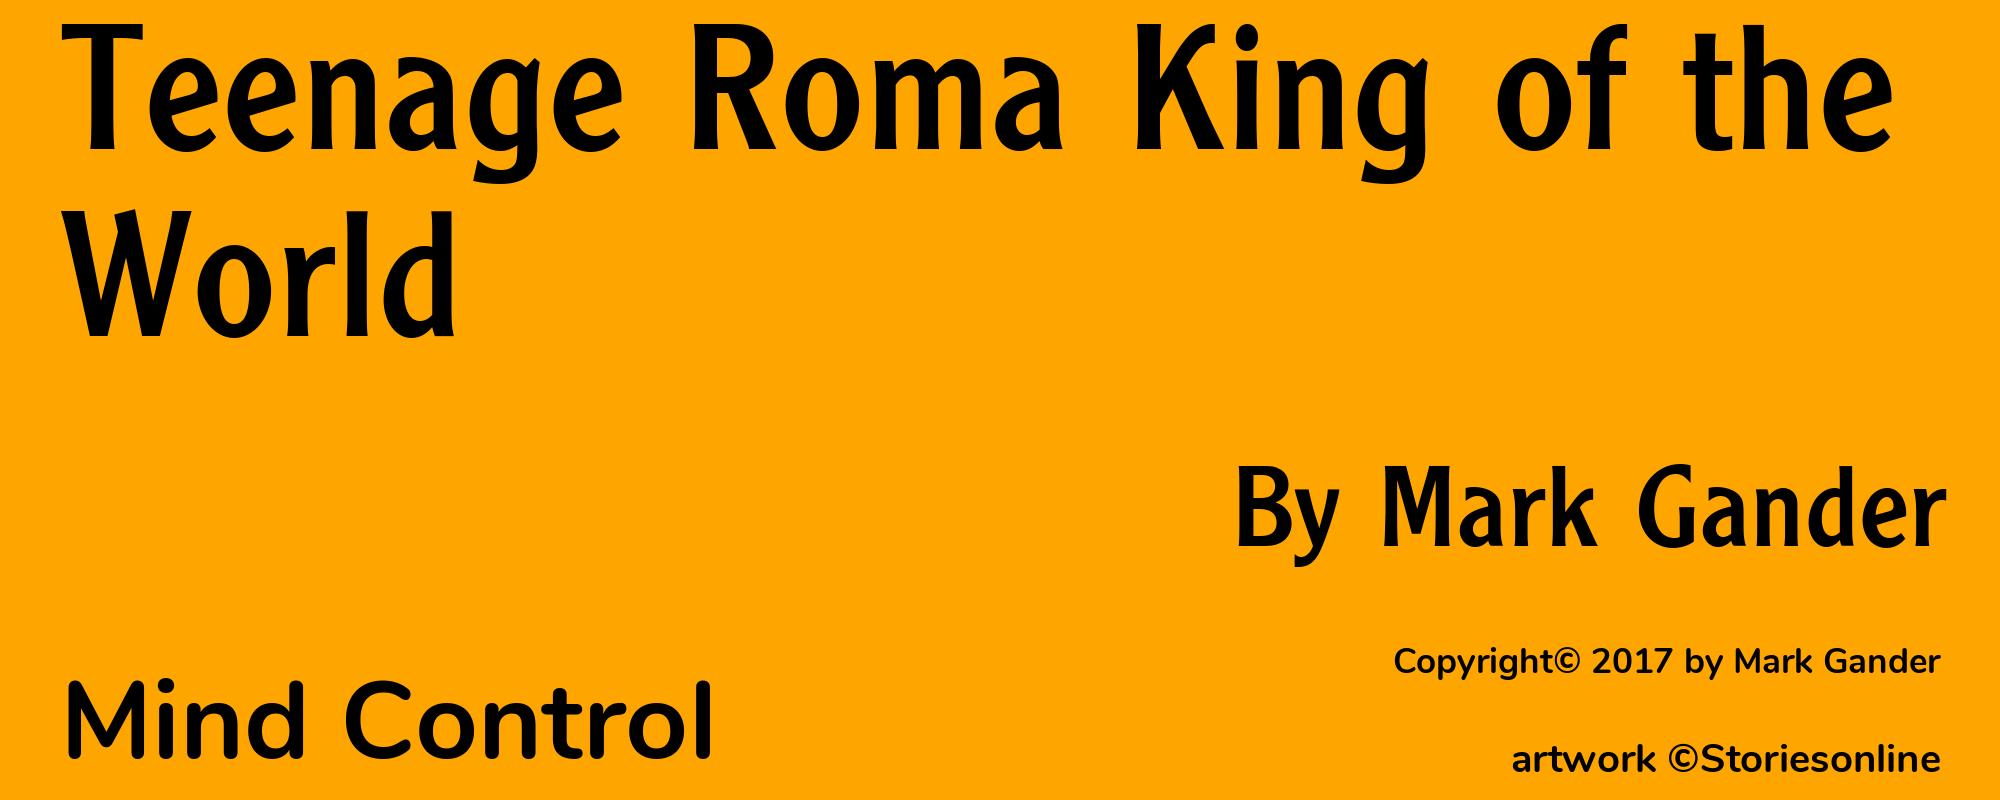 Teenage Roma King of the World - Cover